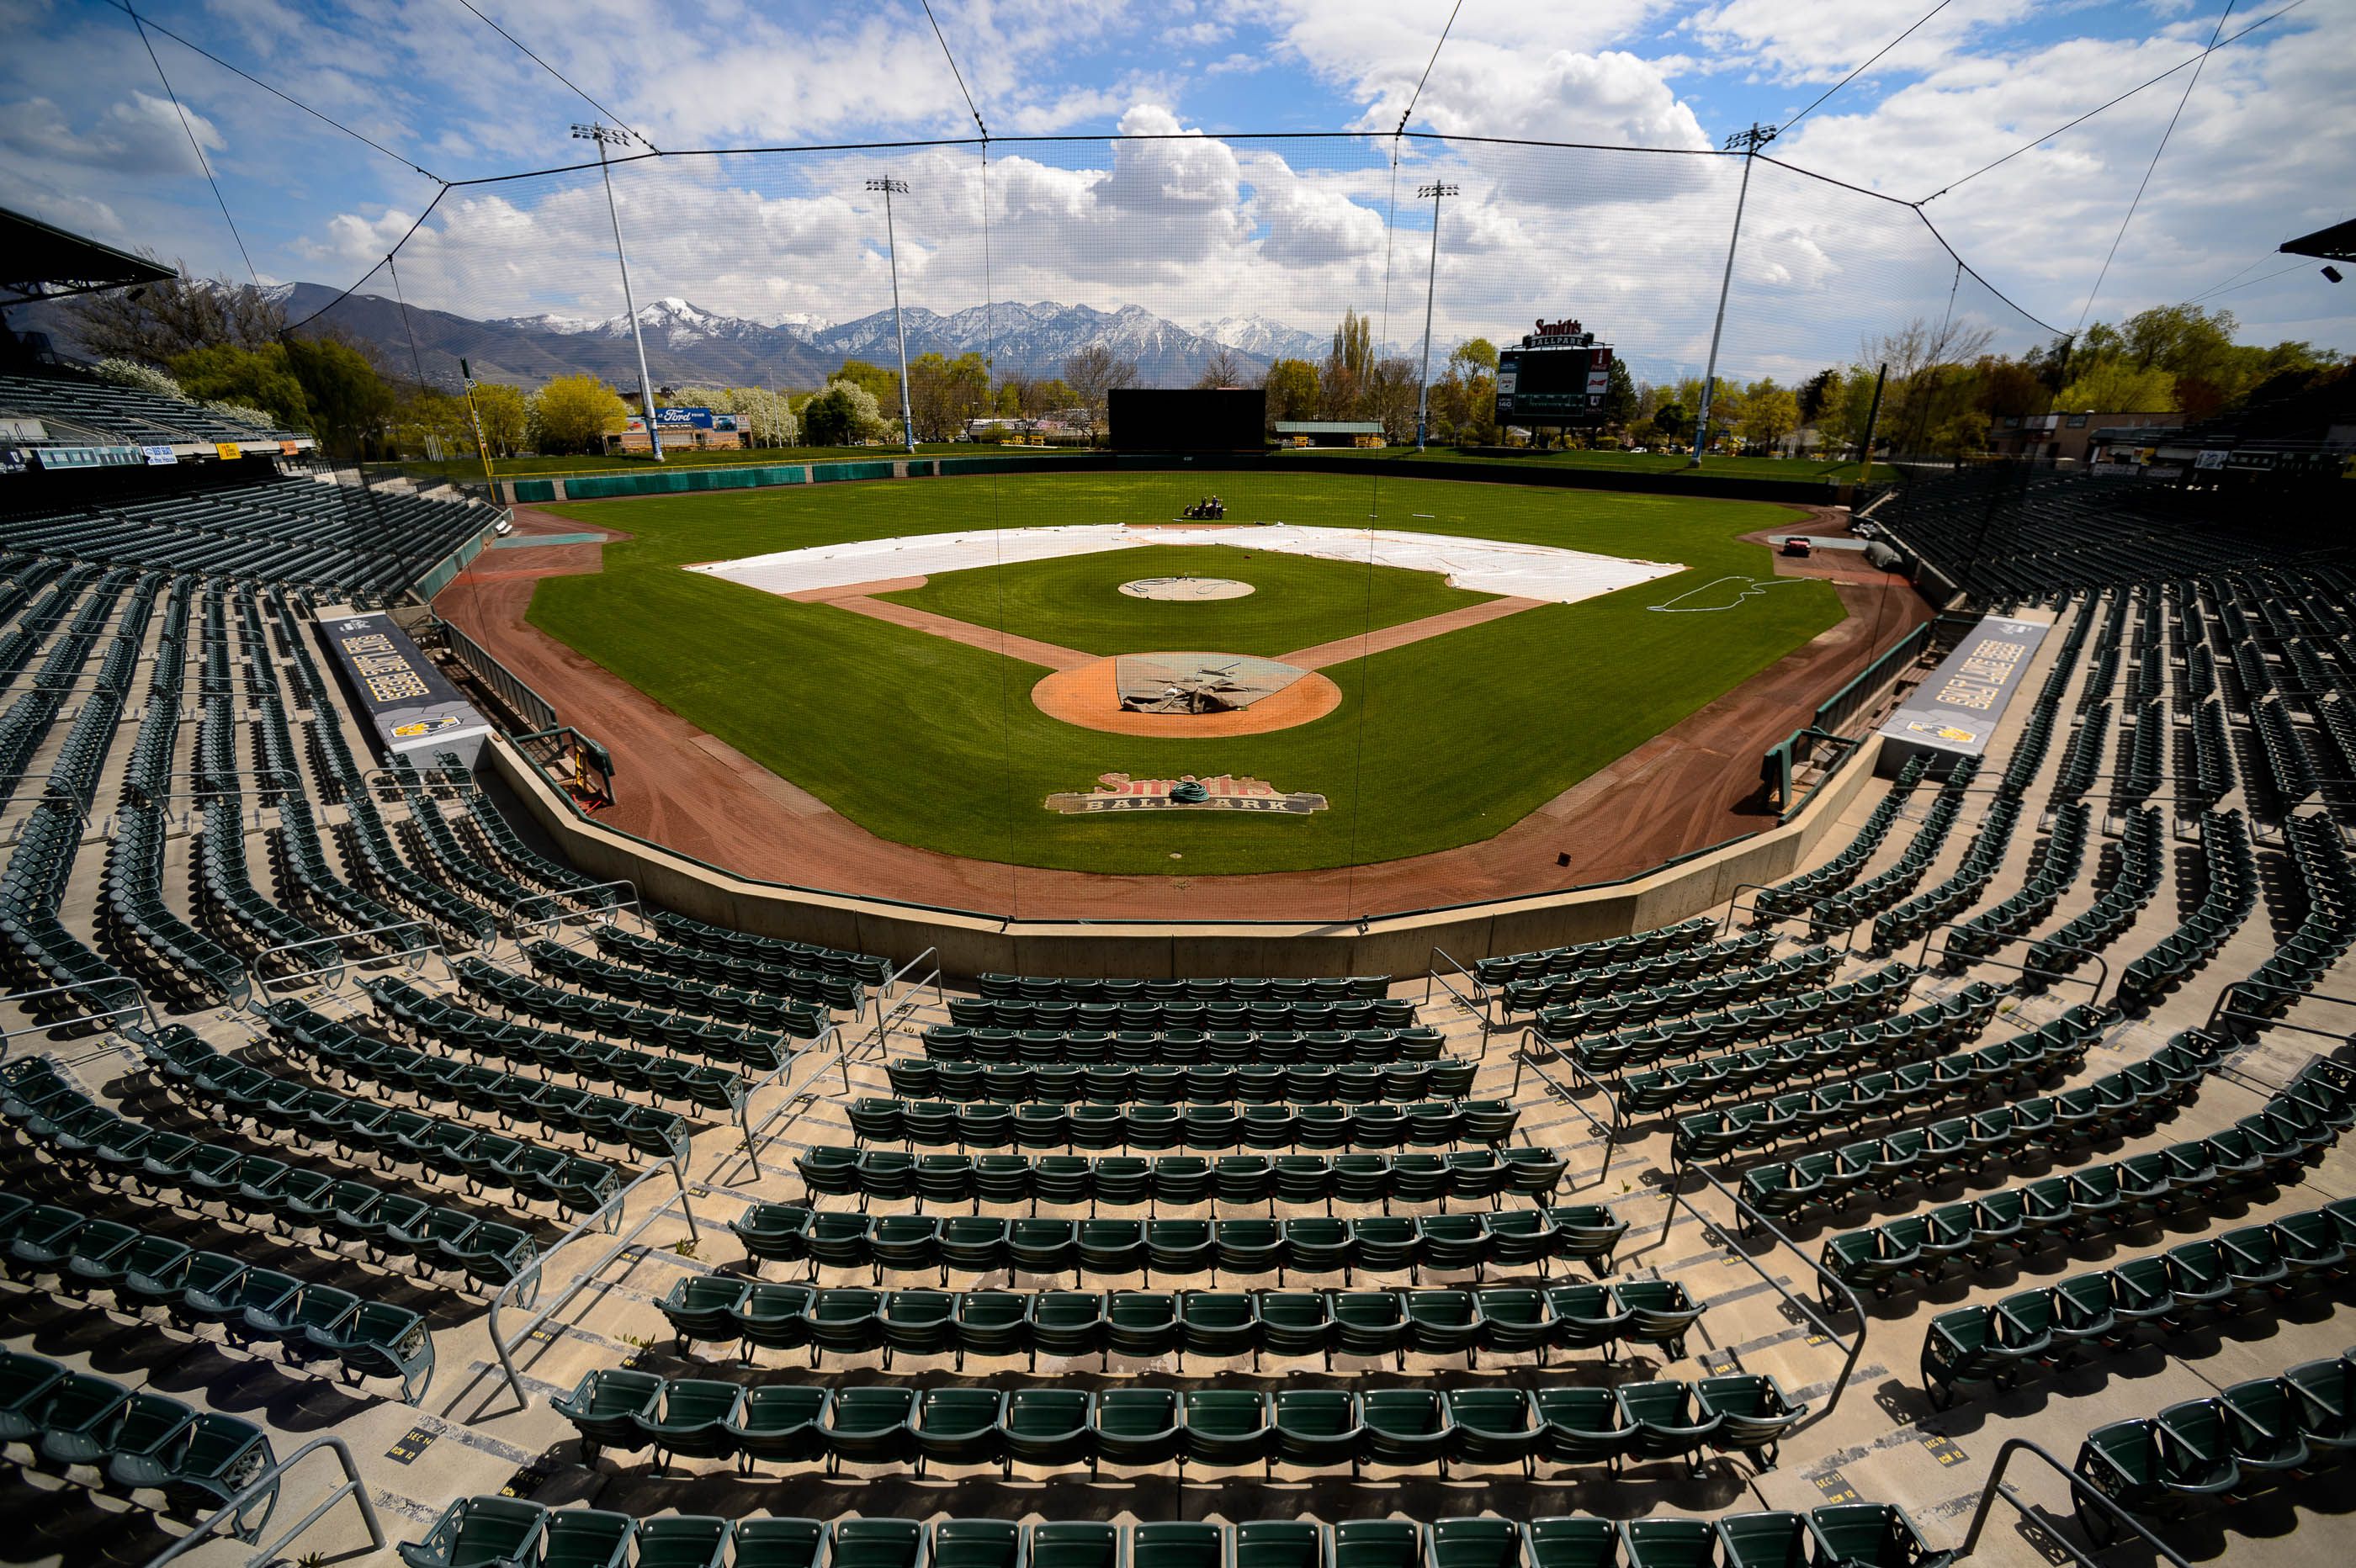 Does SLC need a roofed stadium for MLB? Data says otherwise